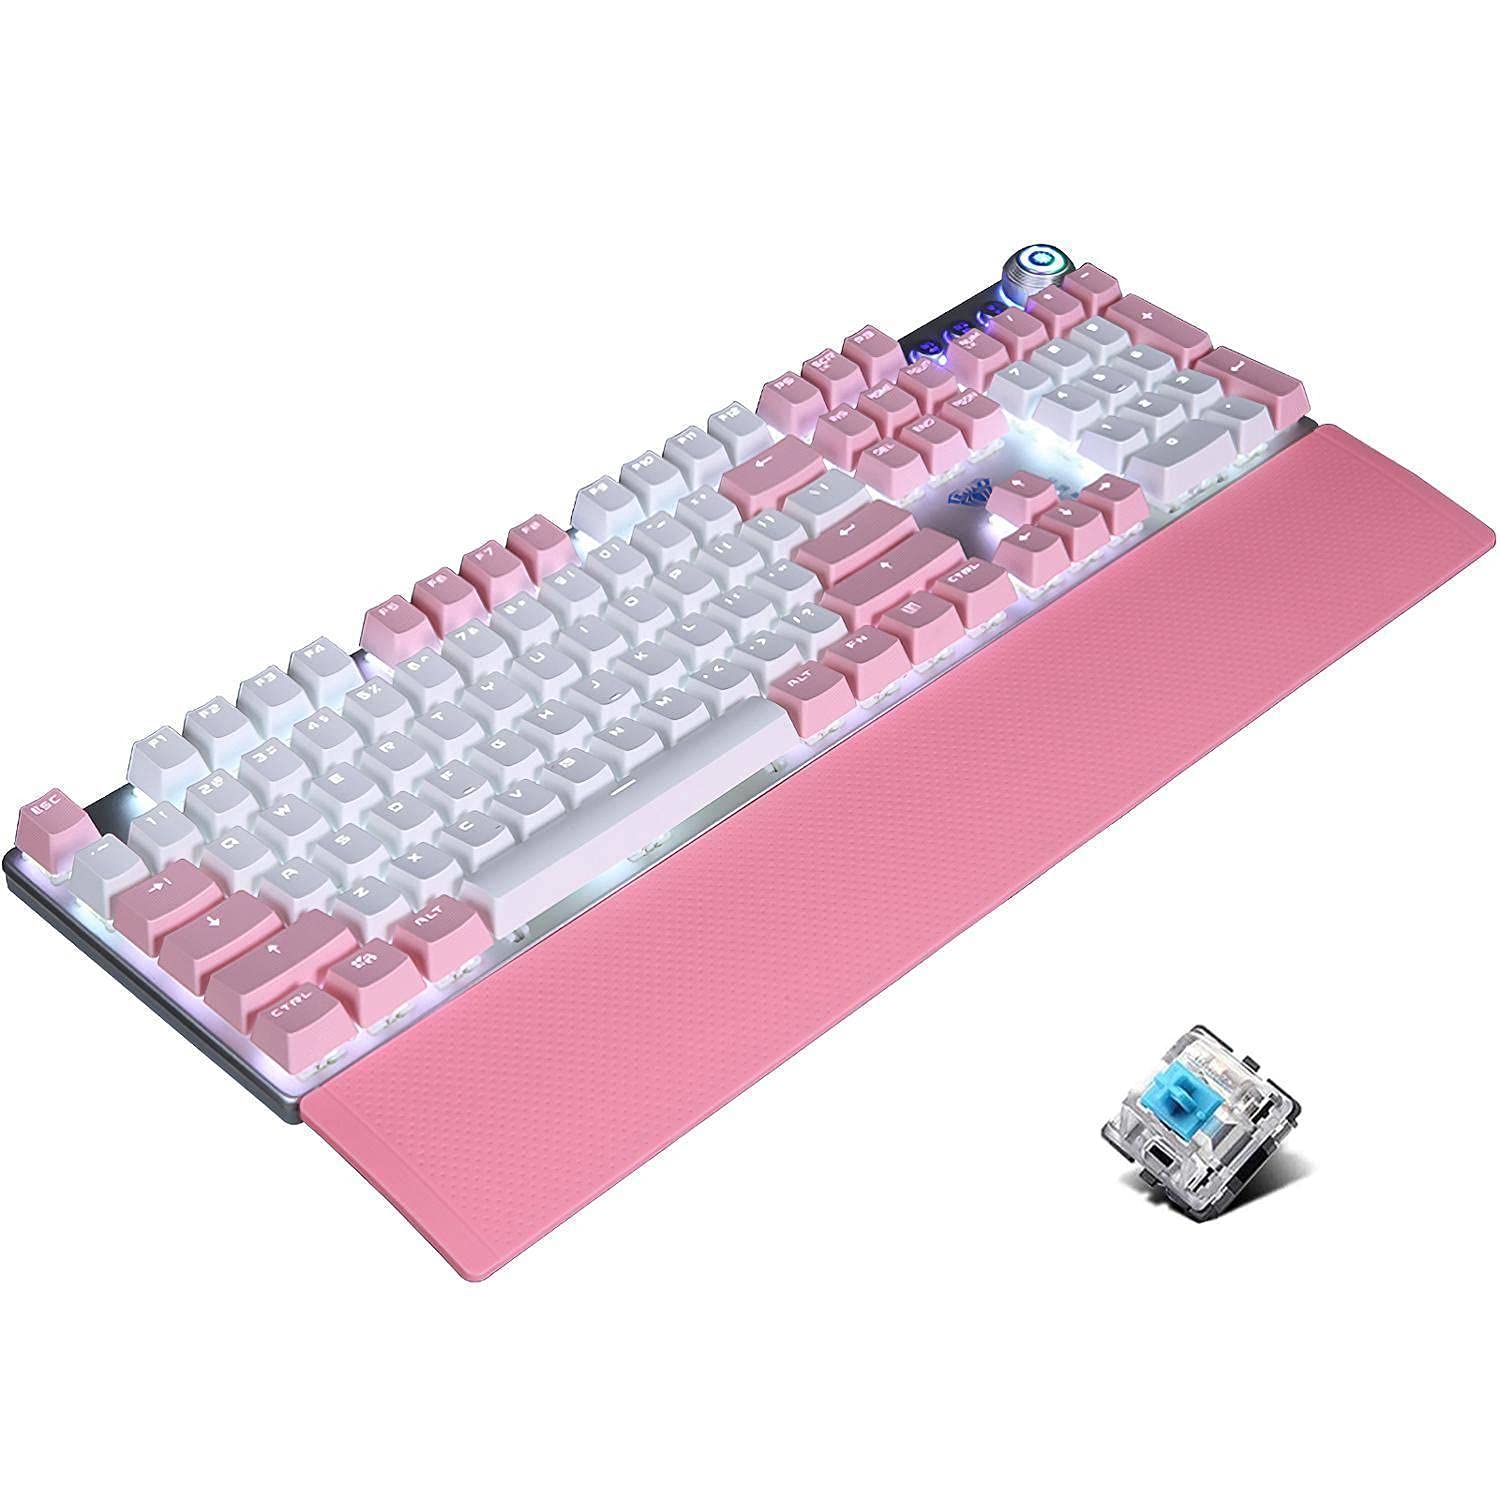 TKM Computers Mechanical Gaming Keyboard, With Multimedia Knob, Wrist Rest, Metal Panel, White Led Backlit, Pink And White Pb?